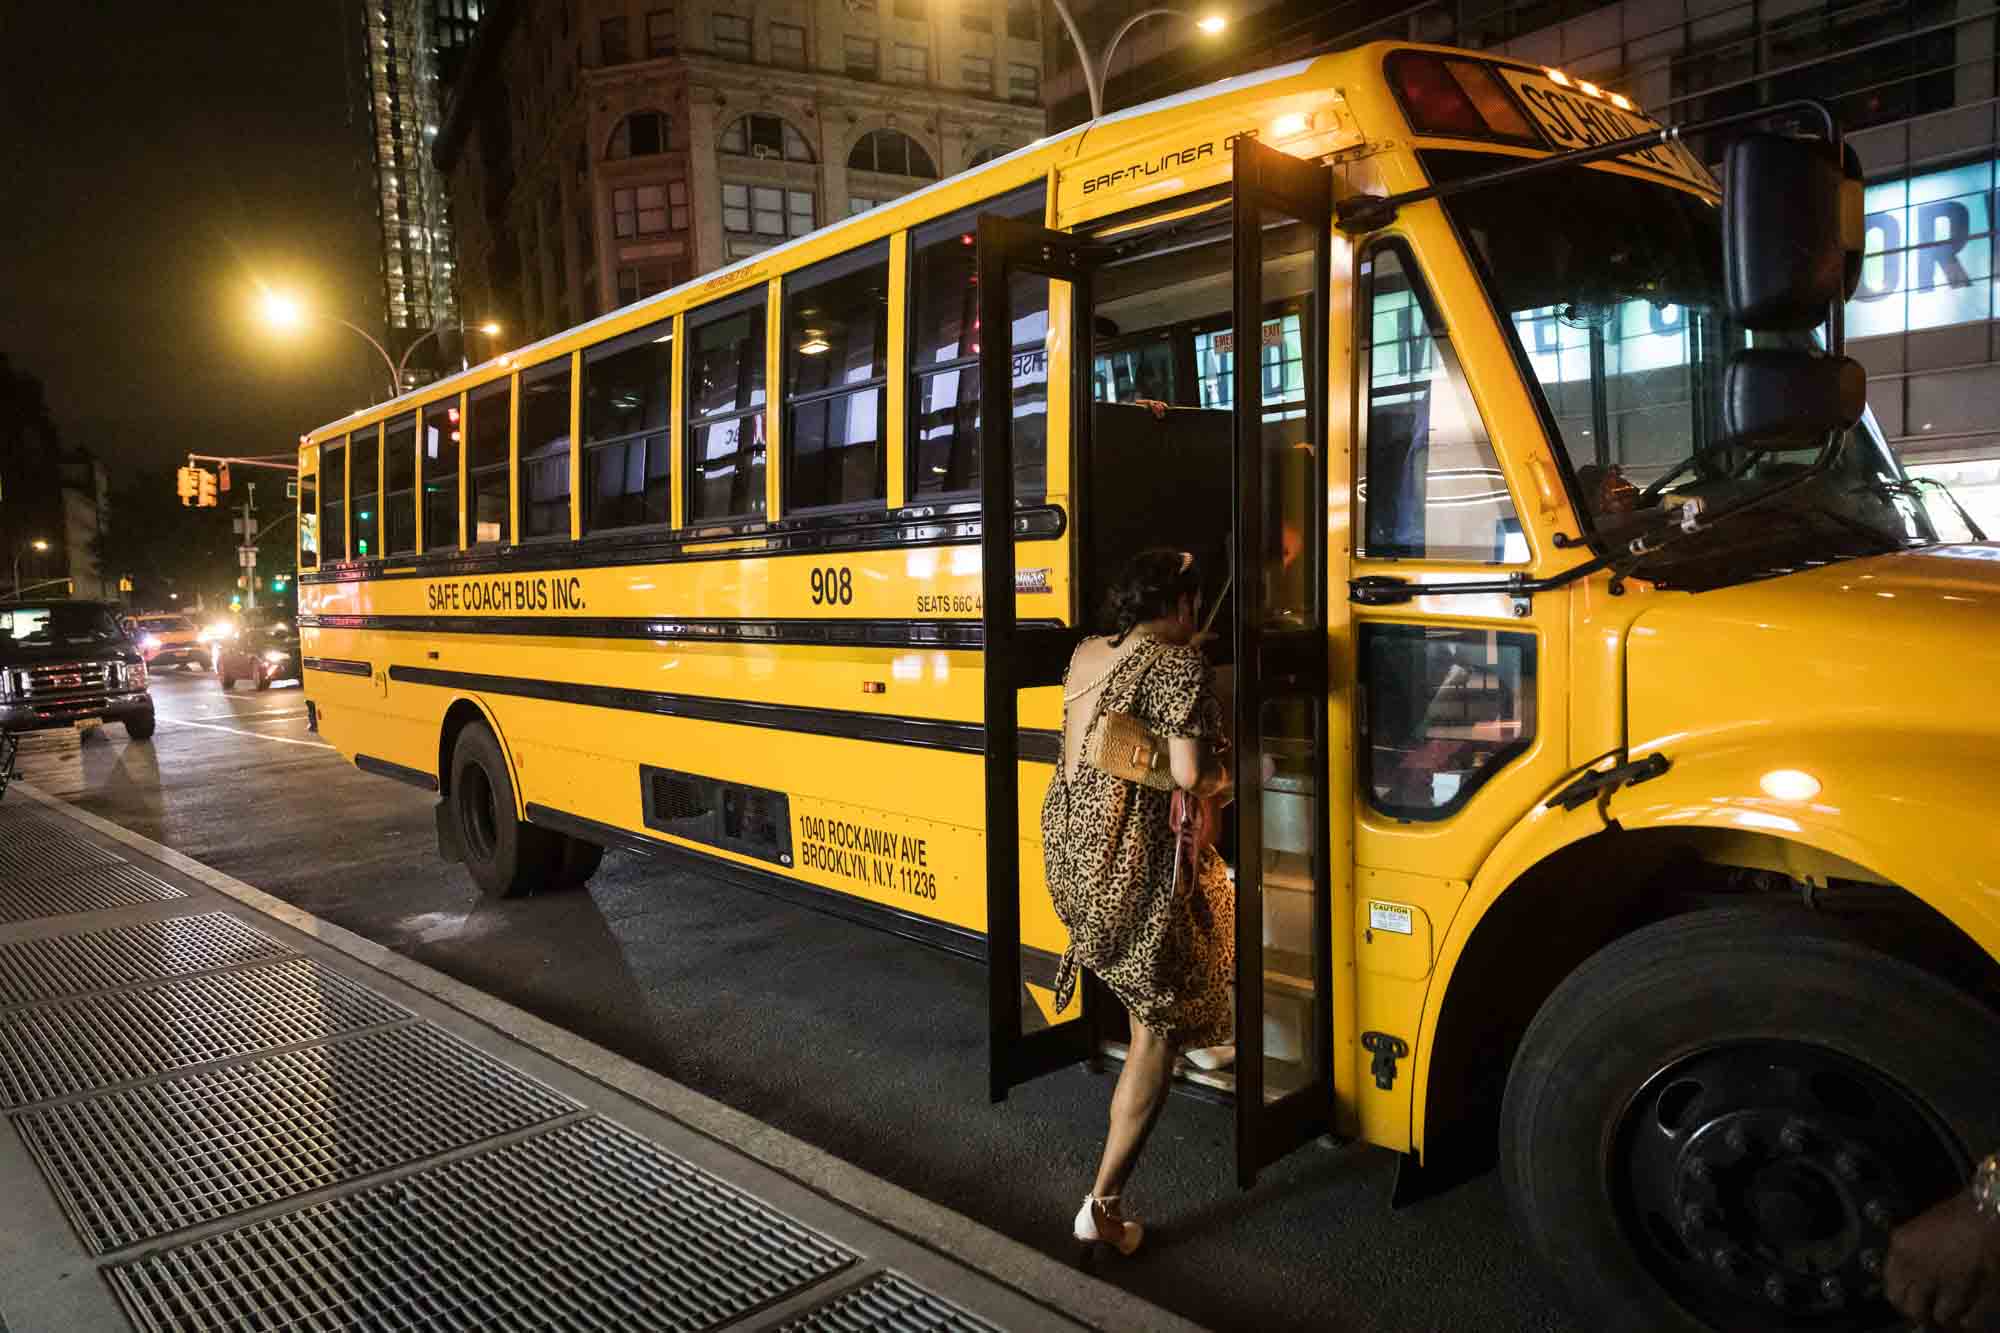 Guest wearing leopard dress getting on school bus at night